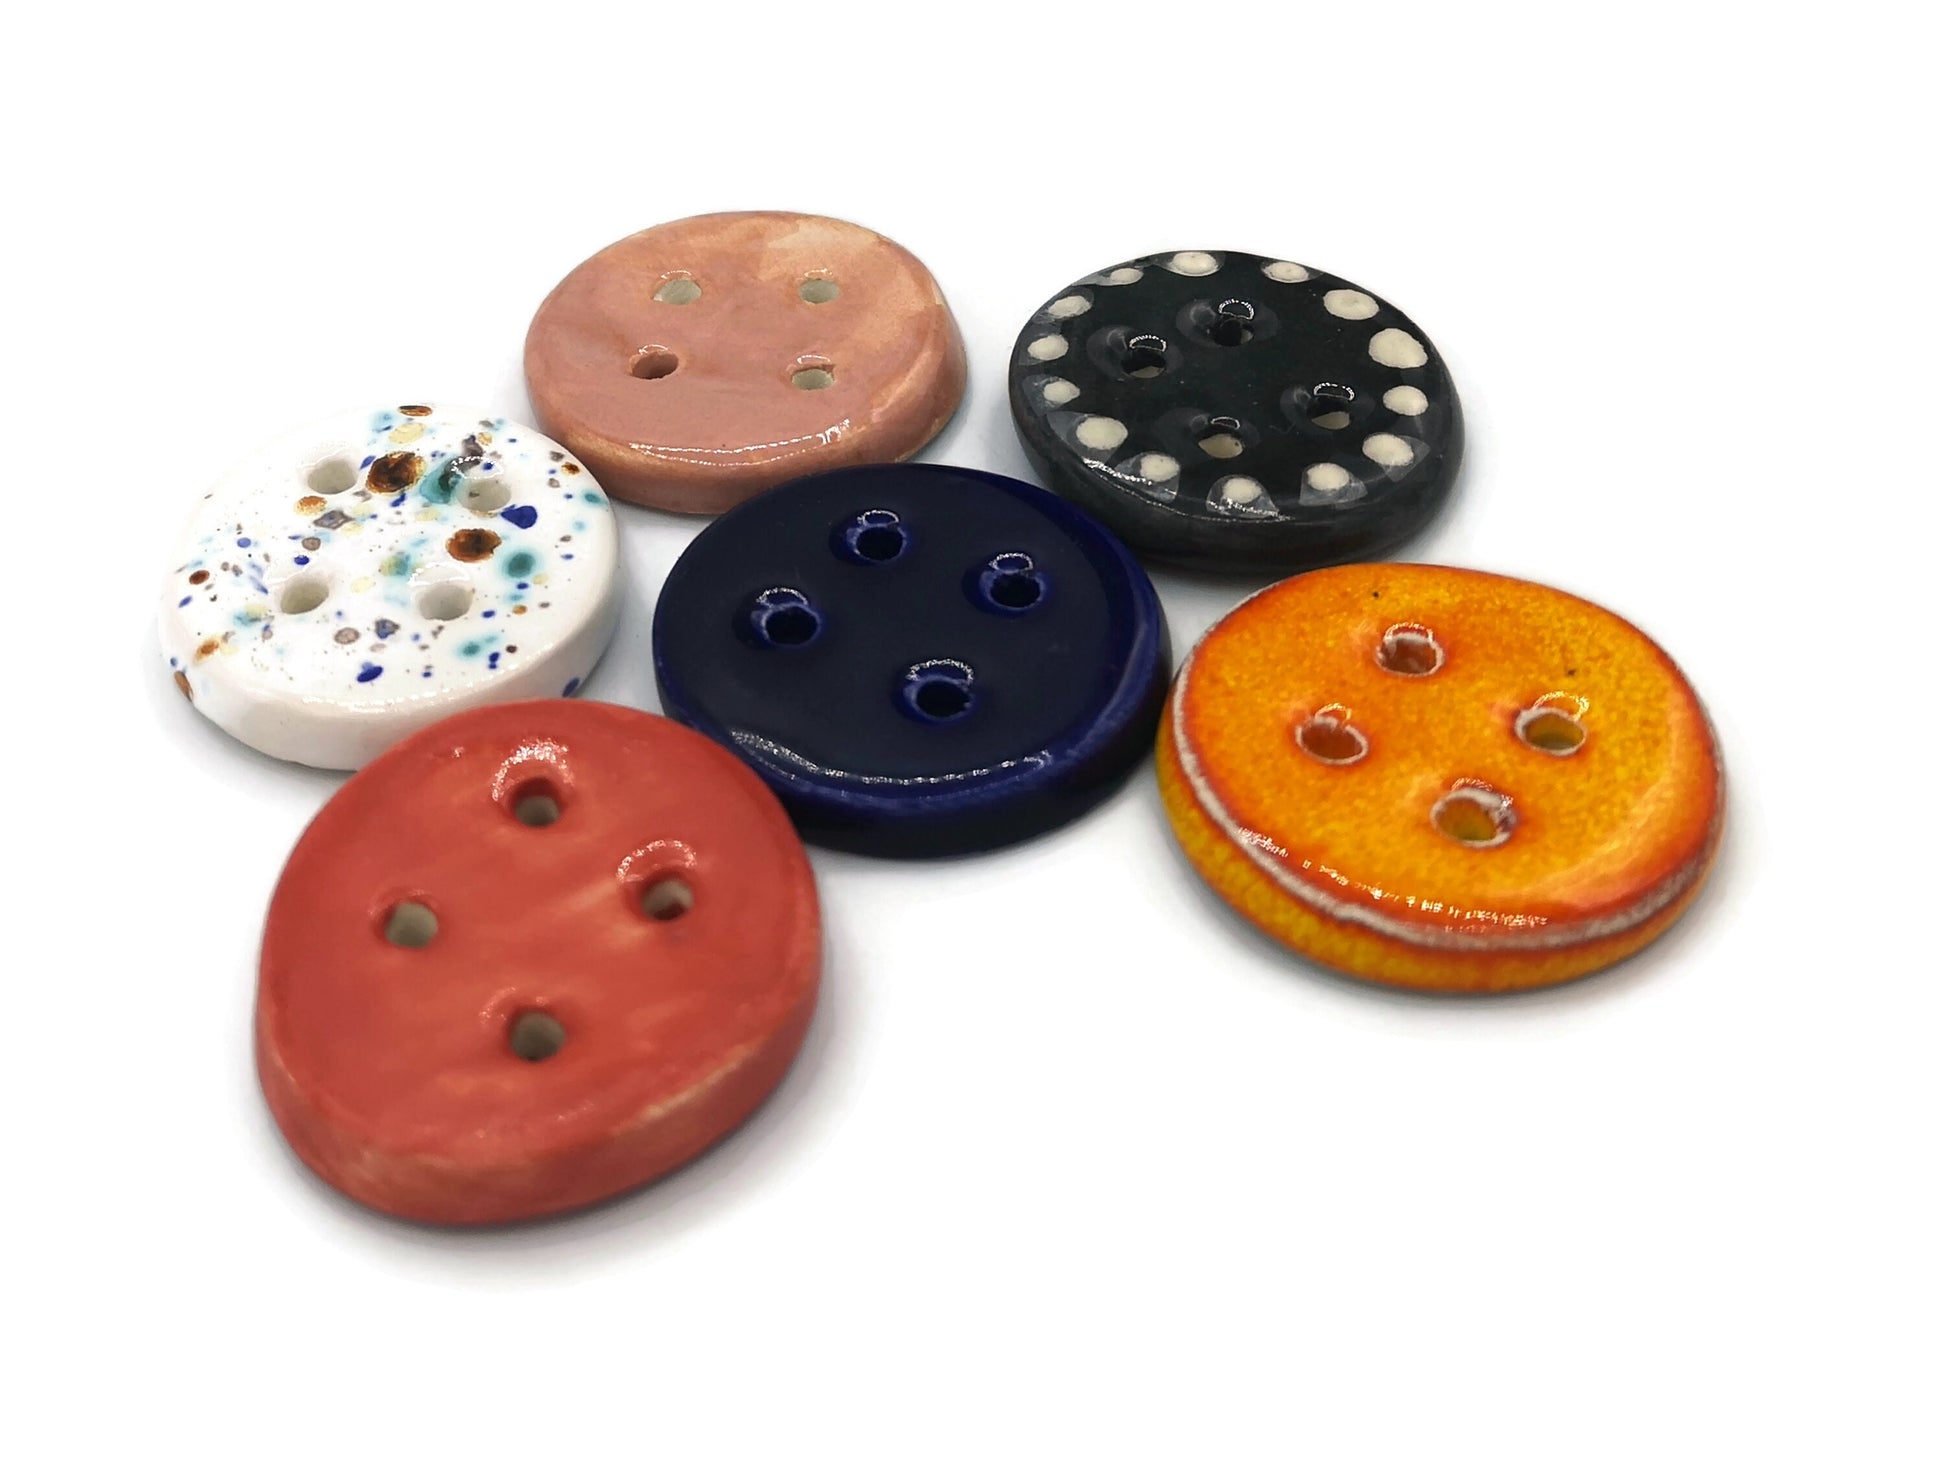 6Pc 40mm Glazed Extra Large Clay Sewing Buttons, Assorted Handmade Ceramic Buttons, Unique Strange And Unusual 4-hole Flat Back Buttons - Ceramica Ana Rafael